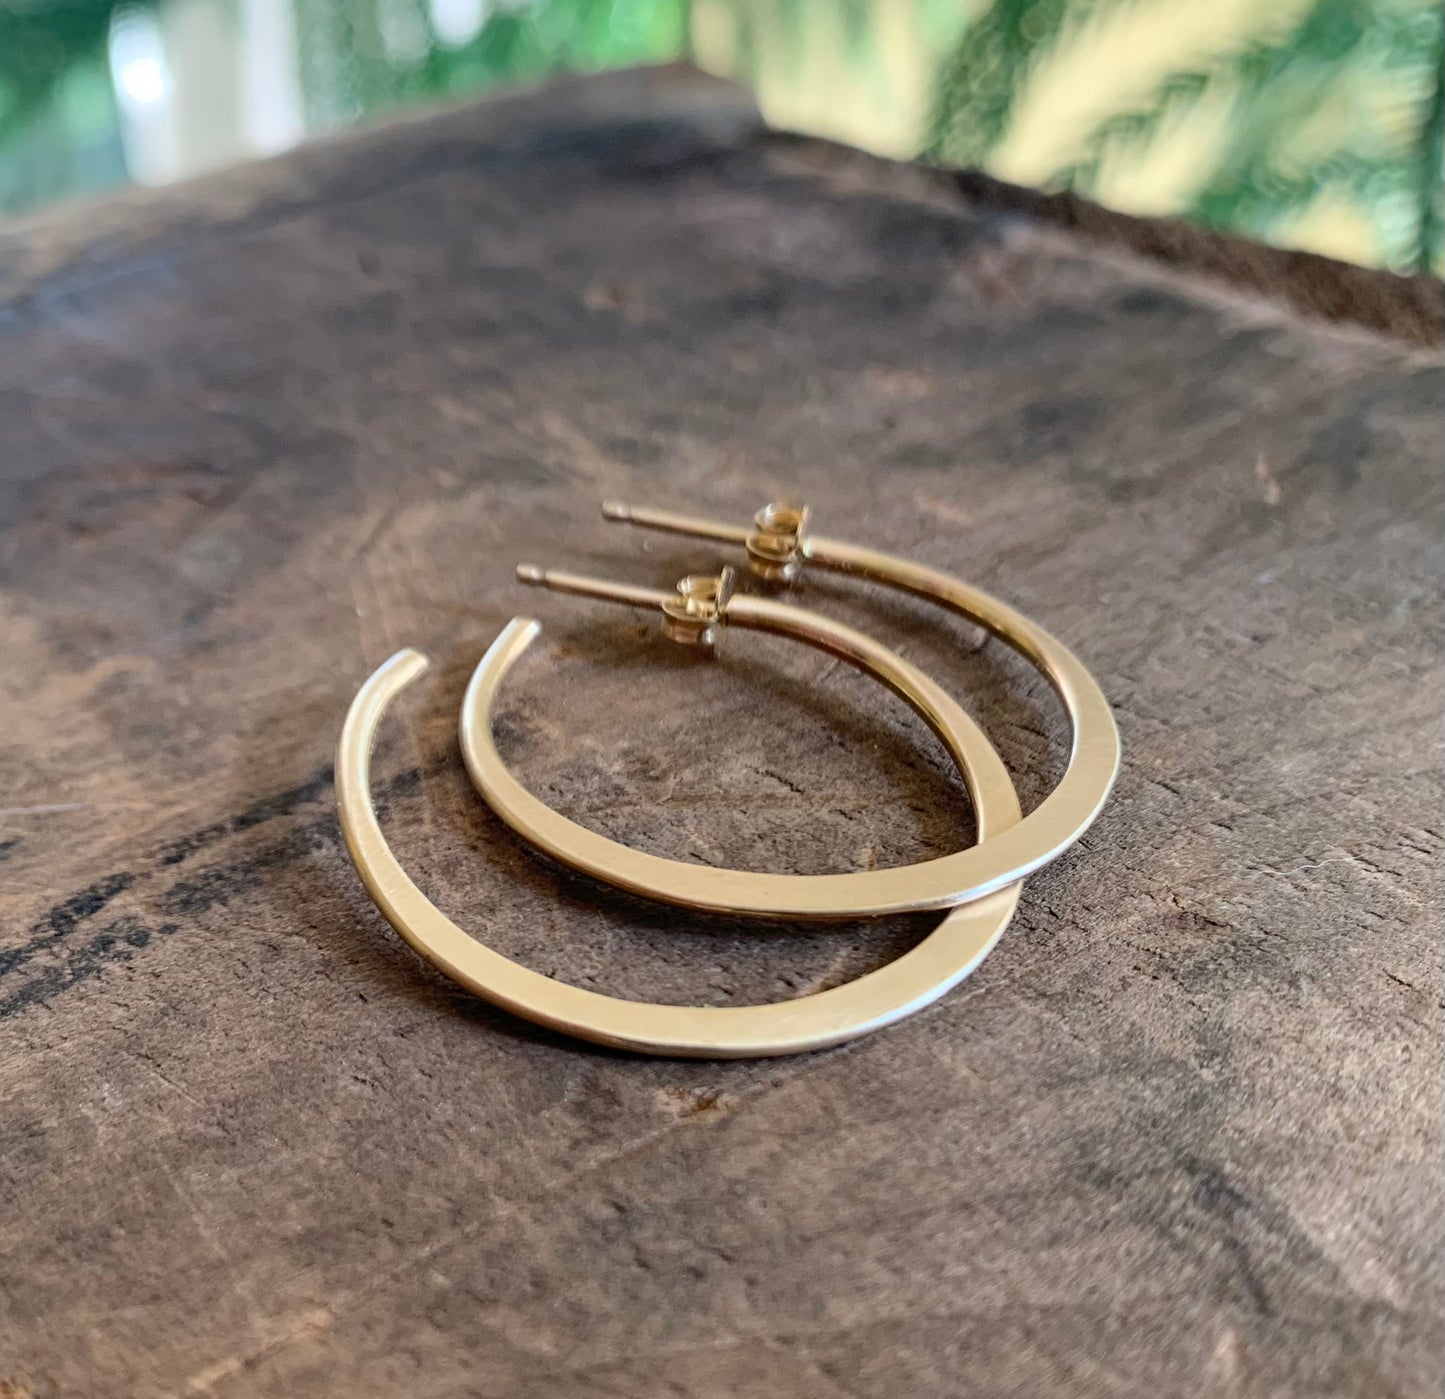 Satin Hoops Thick Gauge Post in 14kt Yellow or Rose Goldfill- Choice of 7 sizes. Handmade. Hammered.